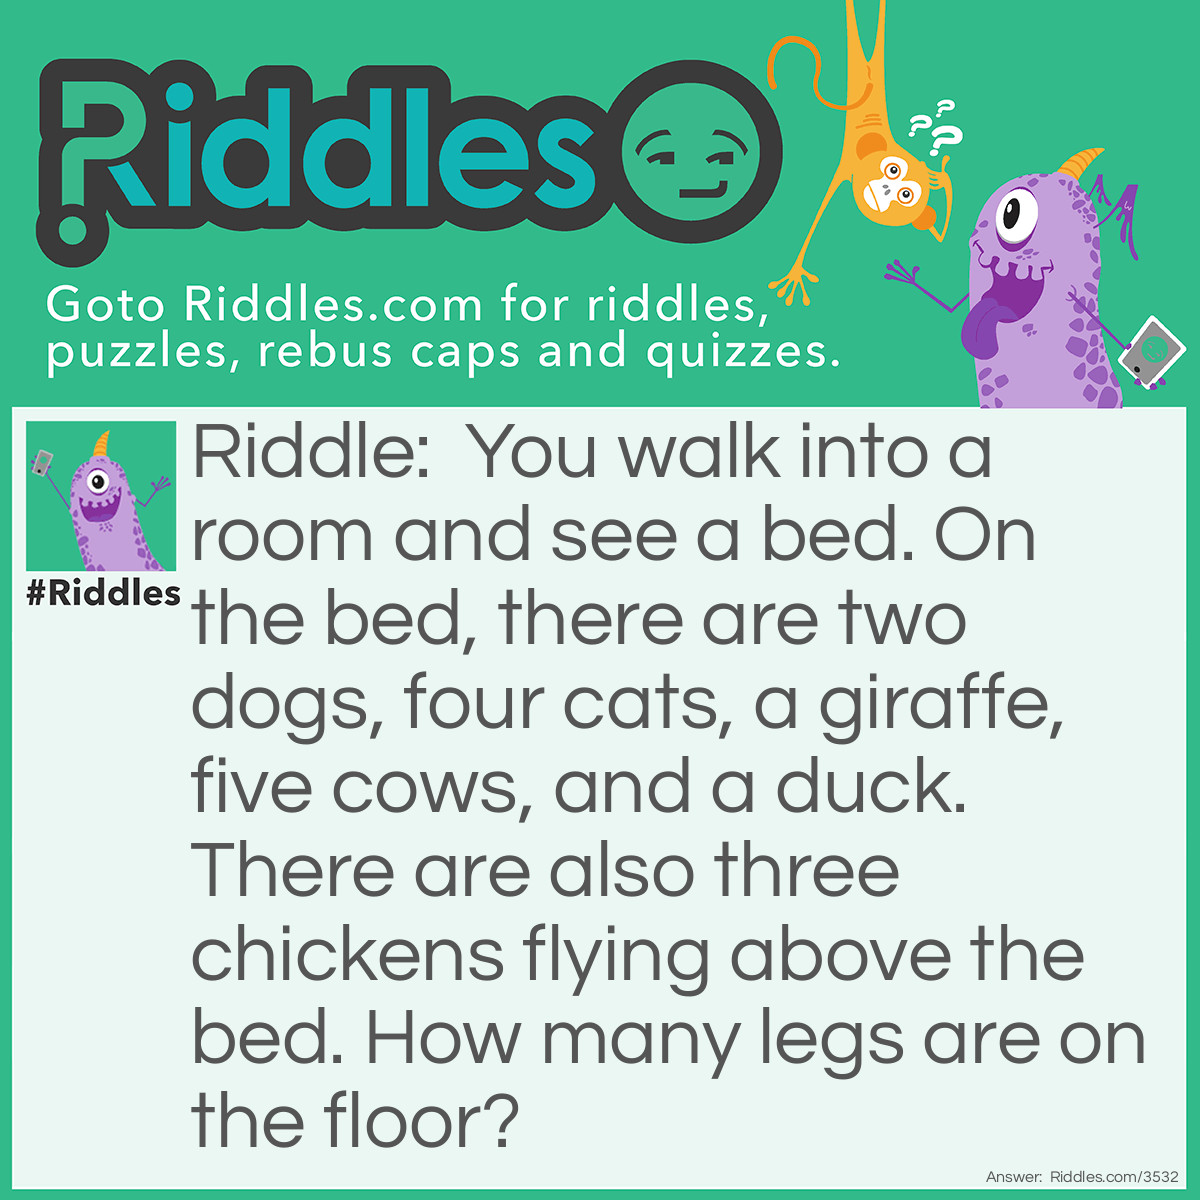 Riddle: You walk into a room and see a bed. On the bed, there are two dogs, four cats, a giraffe, five cows, and a duck. There are also three chickens flying above the bed. How many legs are on the floor? Answer: There are six legs on the floor. All of the animals are on the bed and no other furniture is mentioned in the room. Four legs from the bed and your two legs because you are standing in the room.